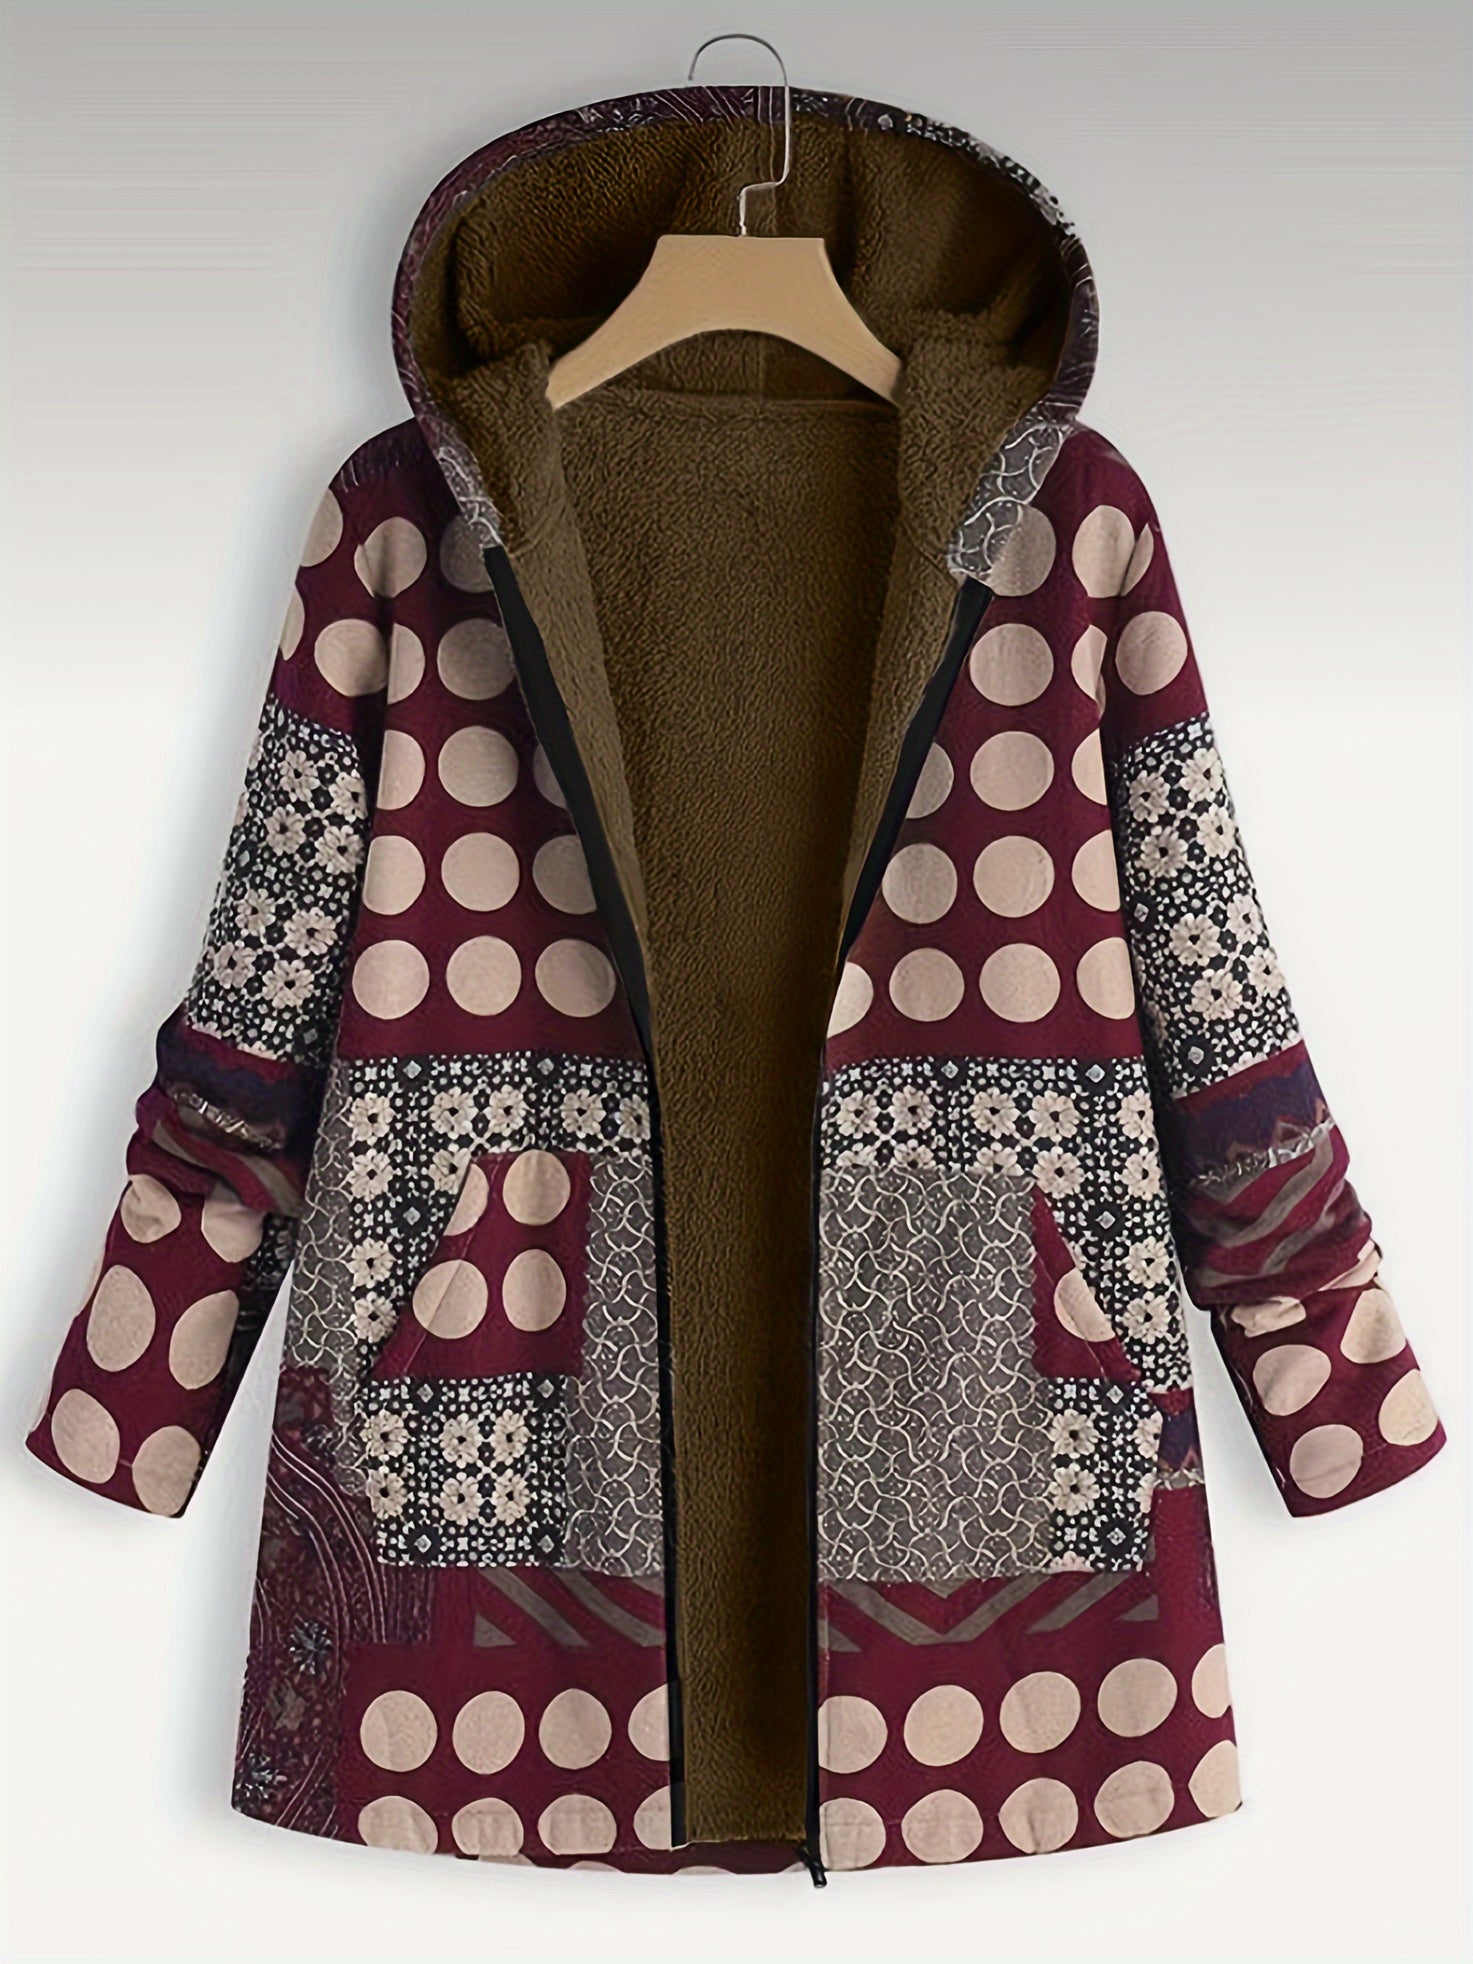 A Plus Size Boho Coat, Women's Plus Patchwork Print Liner Fleece Long Sleeve Zipper Hooded Tunic Coat With Pockets by Maramalive™ hangs on a wooden hanger. The coat, perfect for winter, features various patterns including polka dots and has an inner brown fleece lining, crafted from polyester for extra warmth.